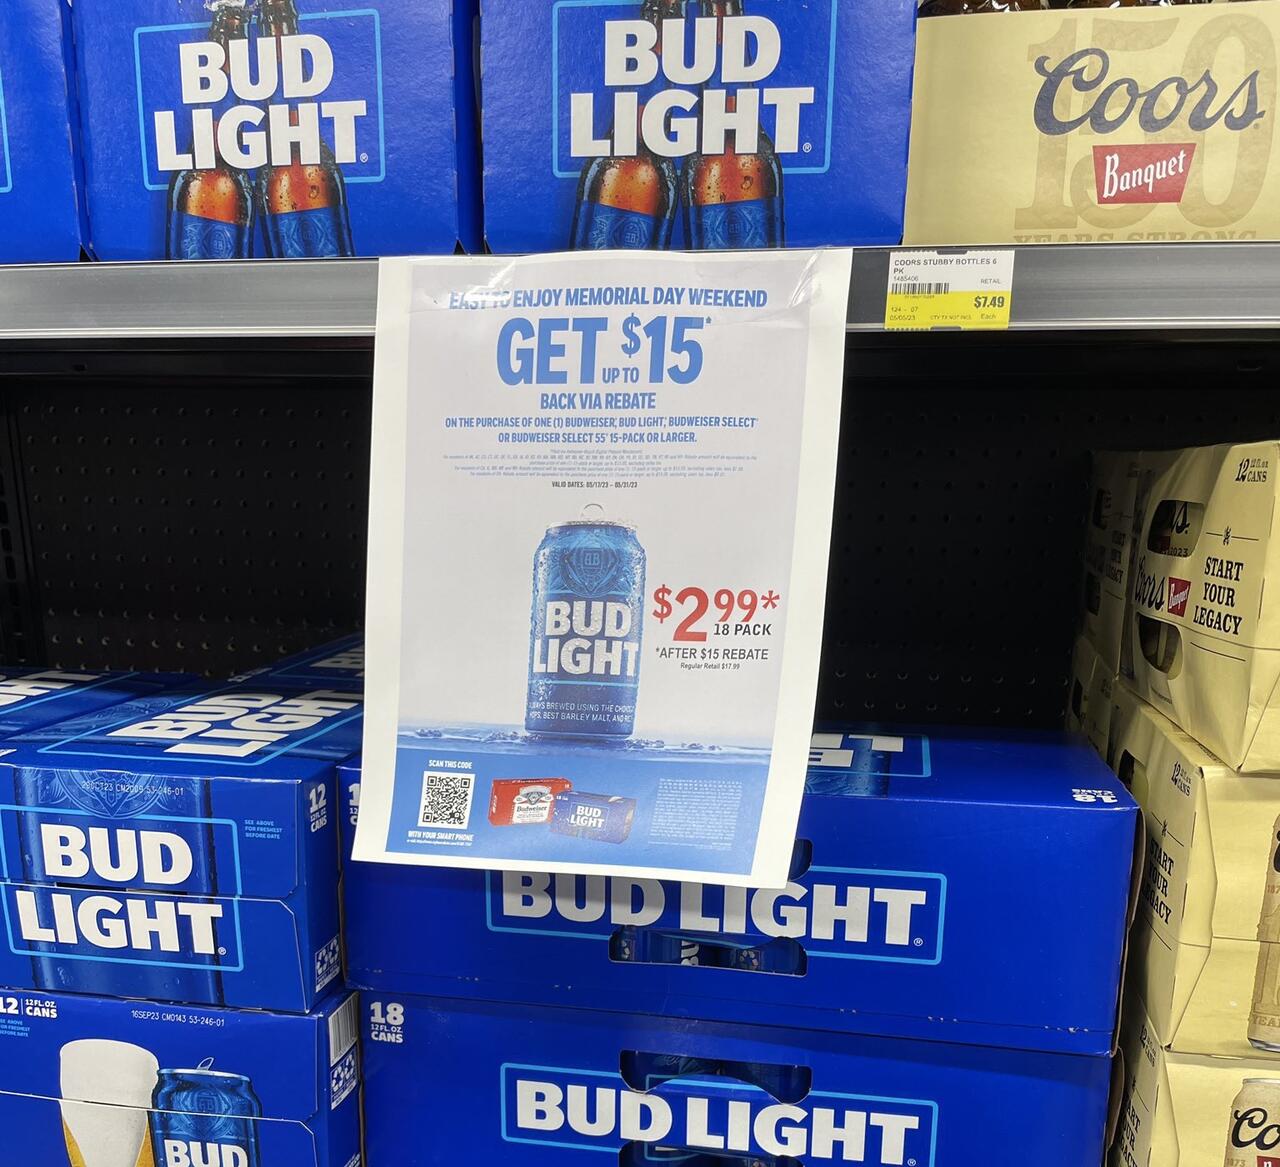 Bud Light Offers 2 99 18 Pack After Sales Tumble Accelerates ZeroHedge